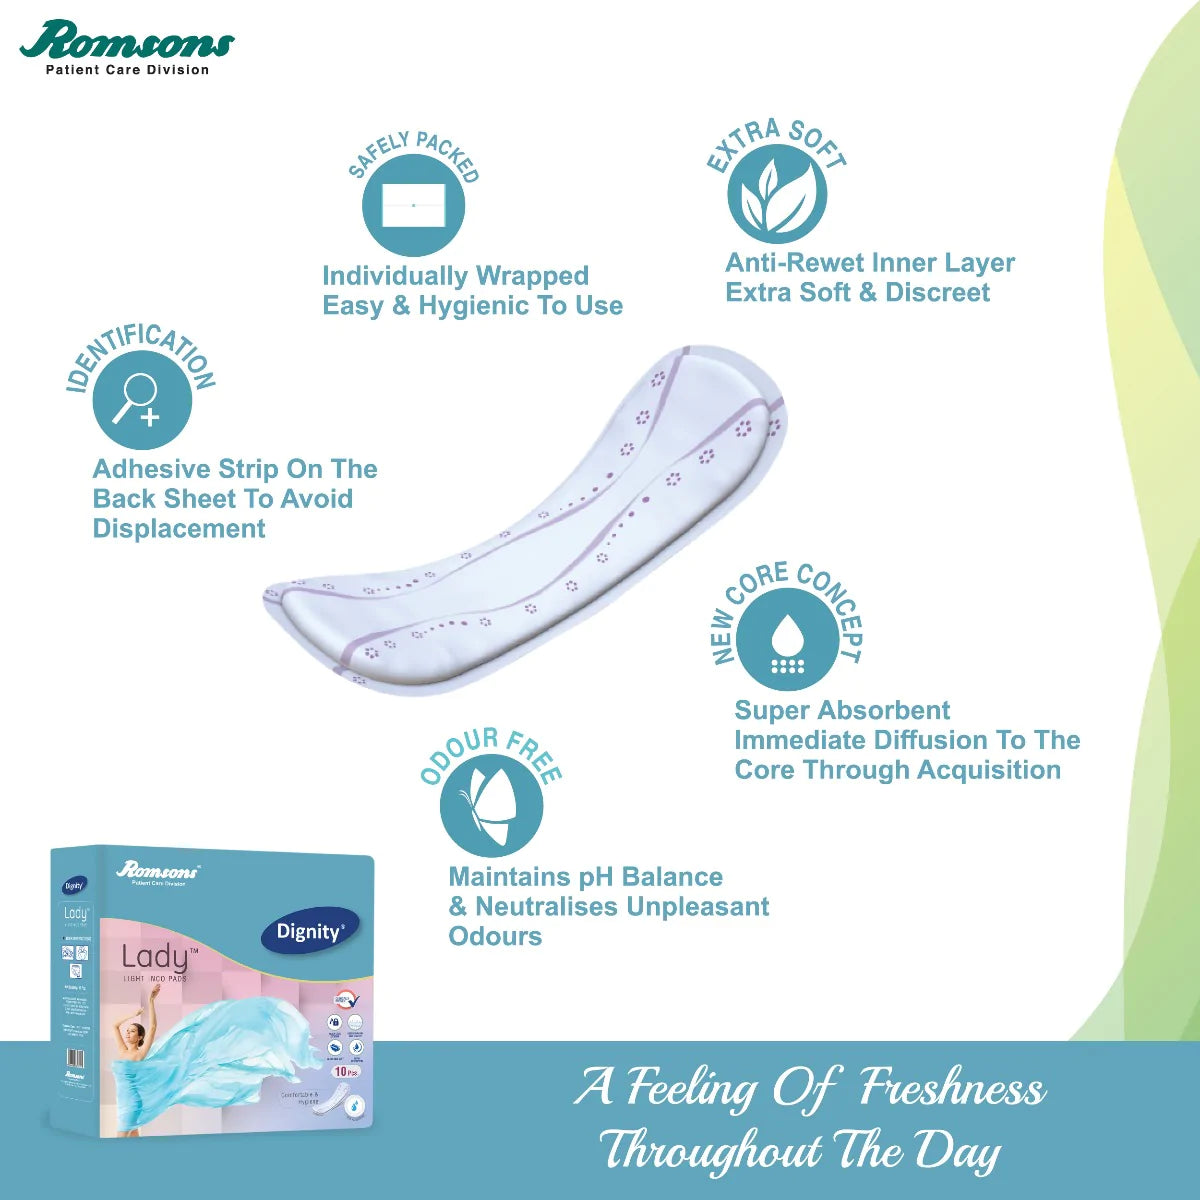 Dignity Lady Light Incontinence Pads (10 Pcs/Pack)